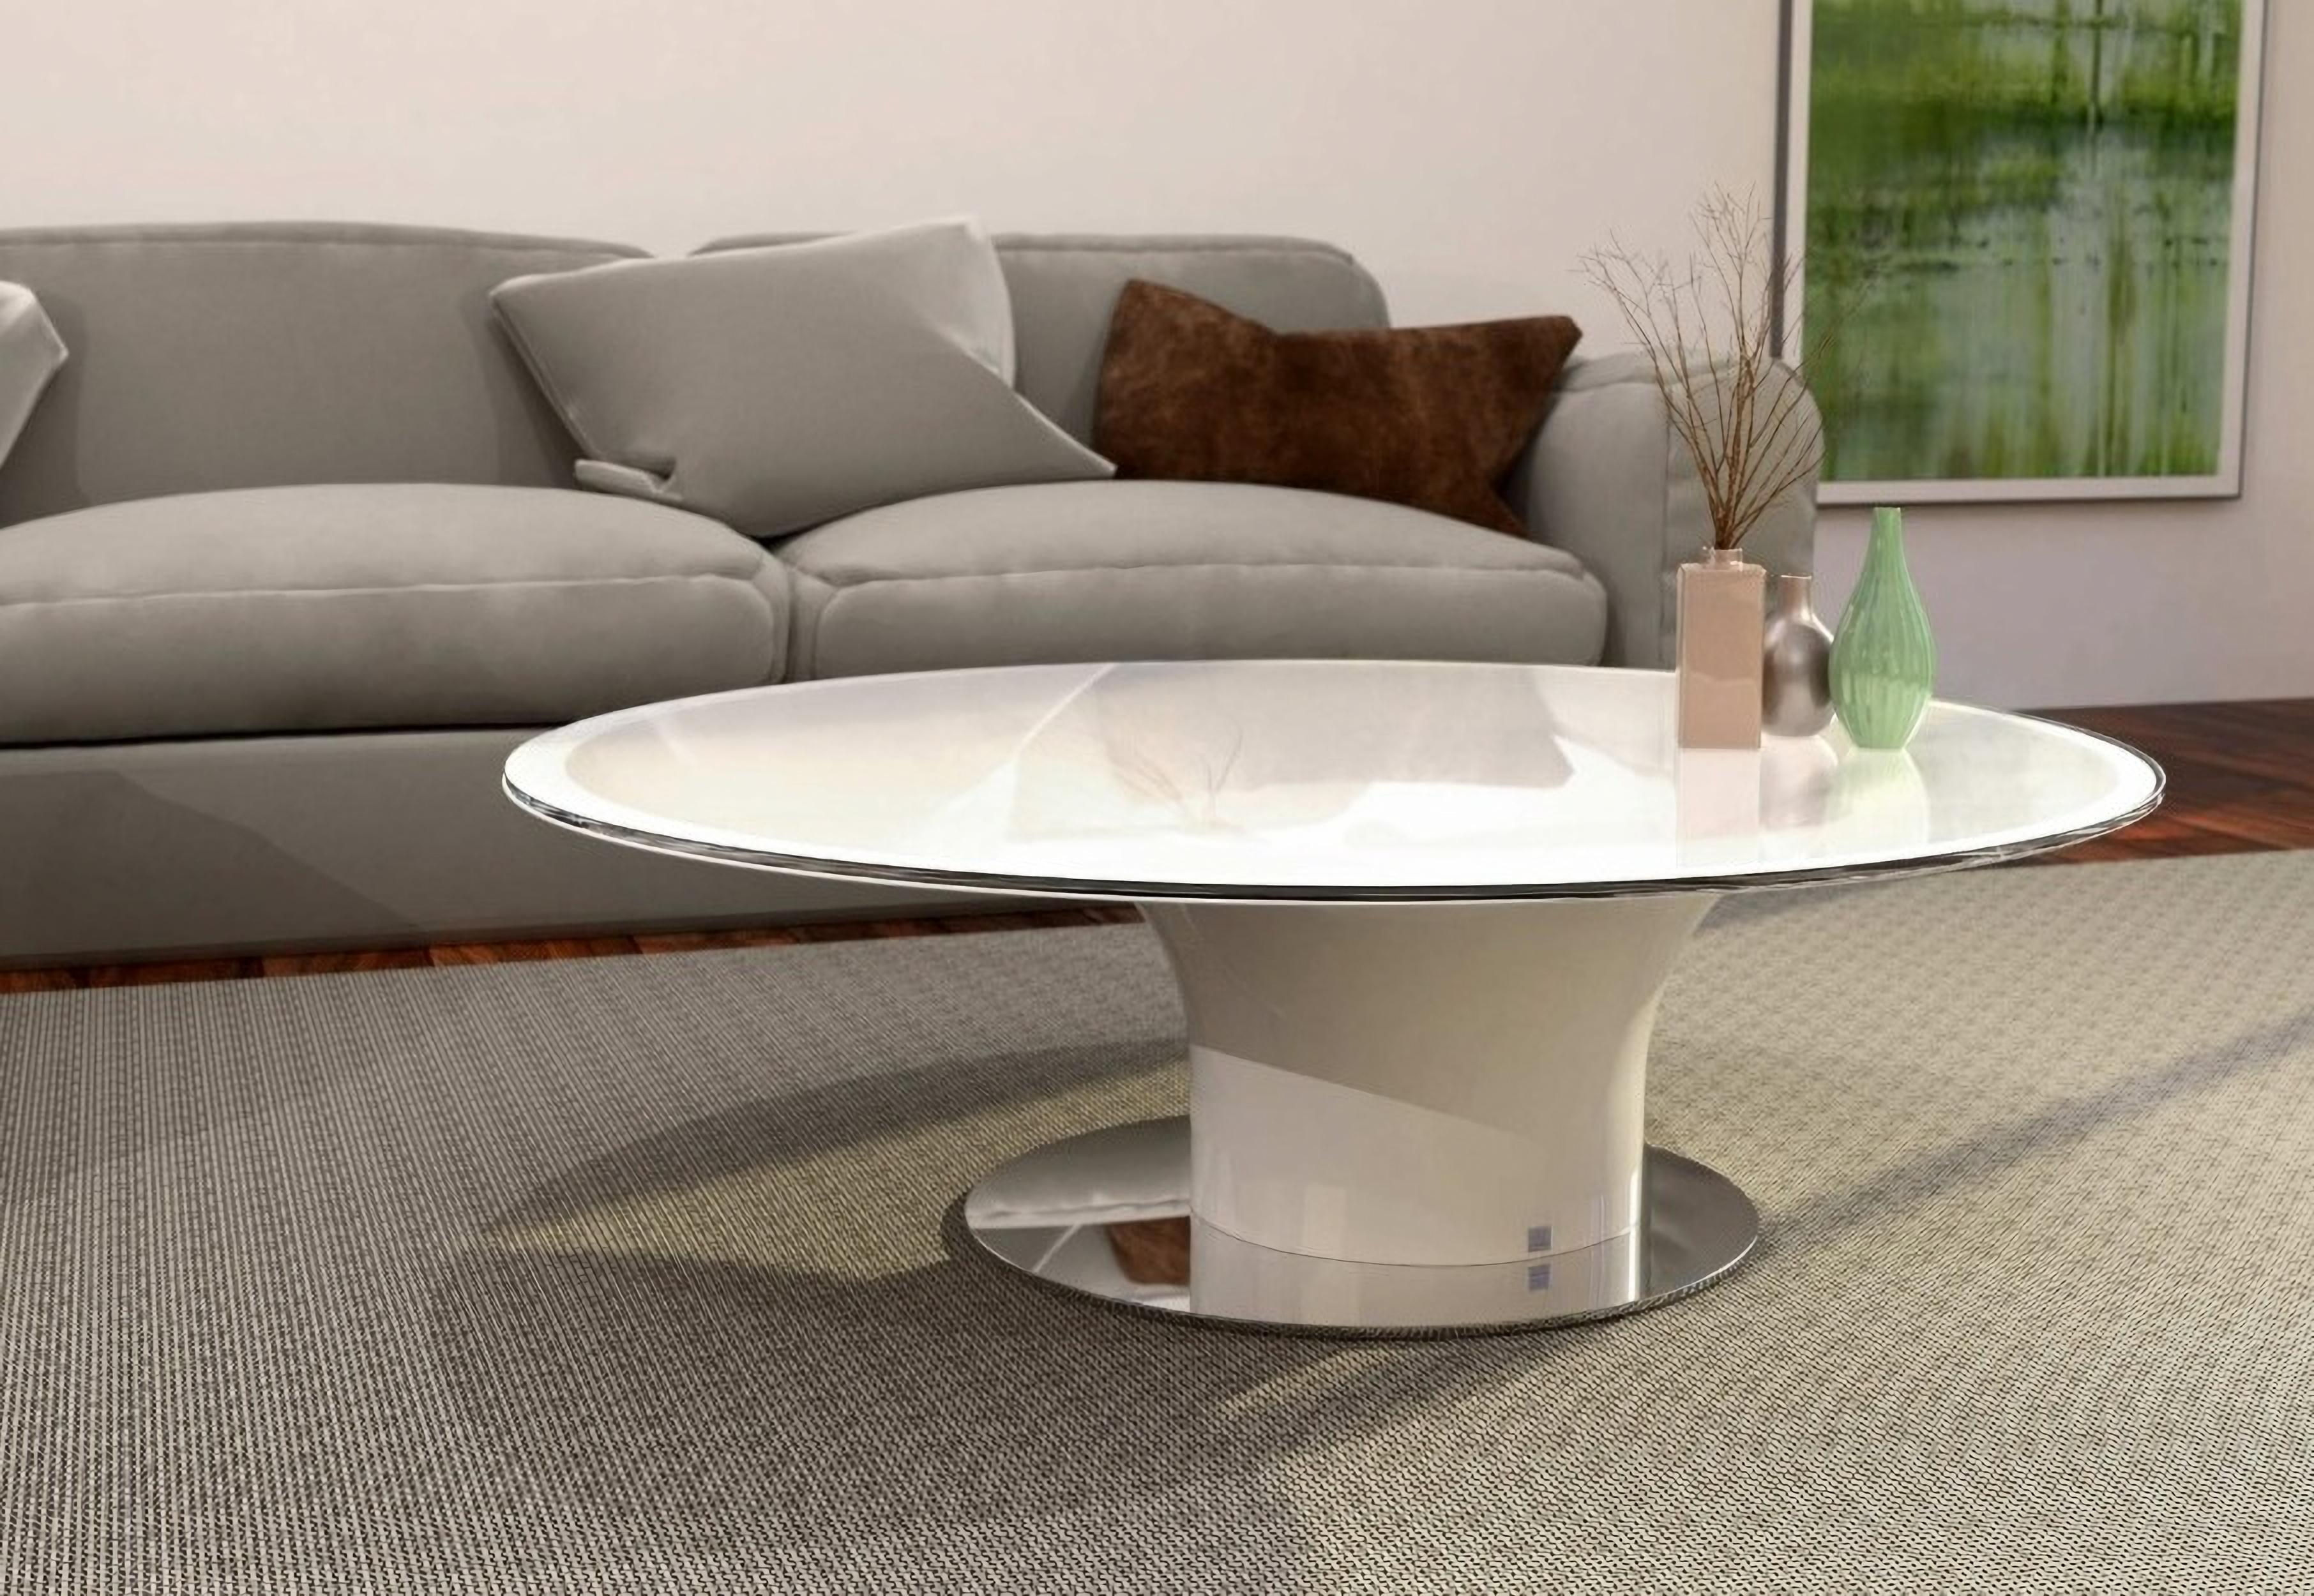 Coffee table

General information

Dimensions (cm): Ø140 x 40
Dimensions (in): Ø55.1 x 15.7
Weight (kg): 85
Weight (lbs): 187.4

Materials and Colors

Top: Colorless tempered glass, 12mm thick, with polished edge;
Resin reinforced with fiberglass,